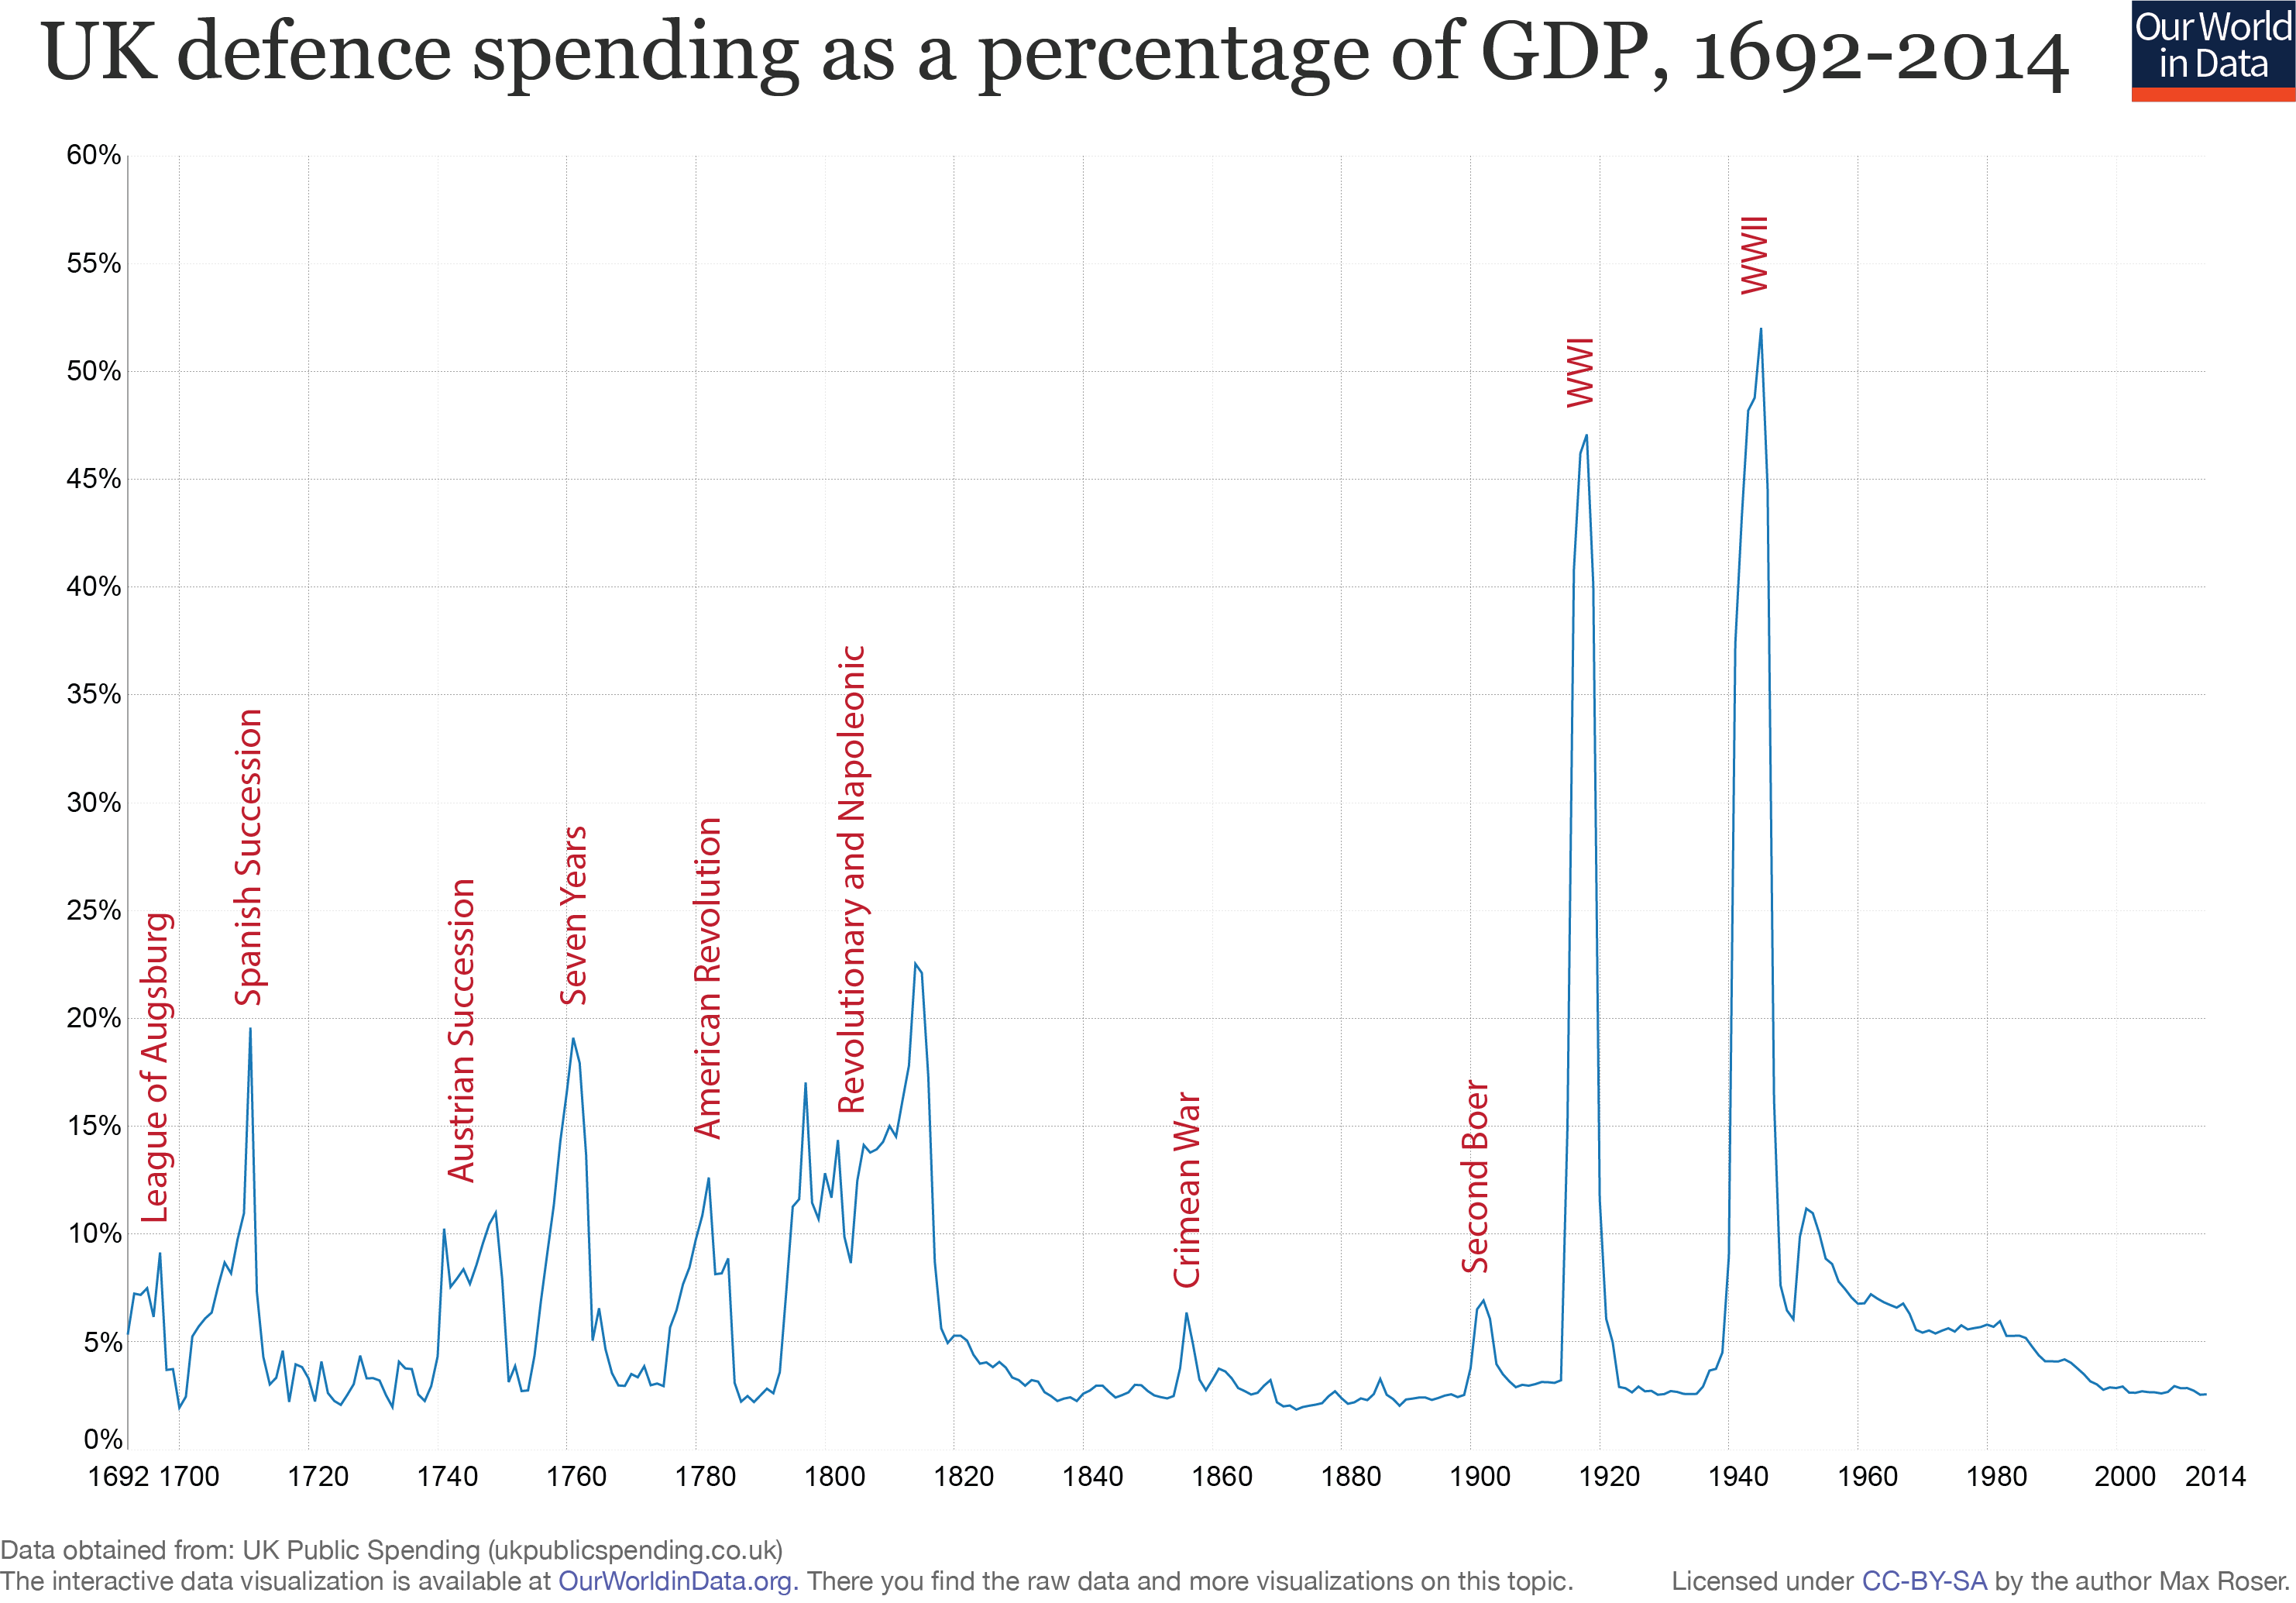 http://ourworldindata.org/wp-content/uploads/2013/08/ourworldindata_uk-defence-spending-as-a-percentage-of-gdp.png